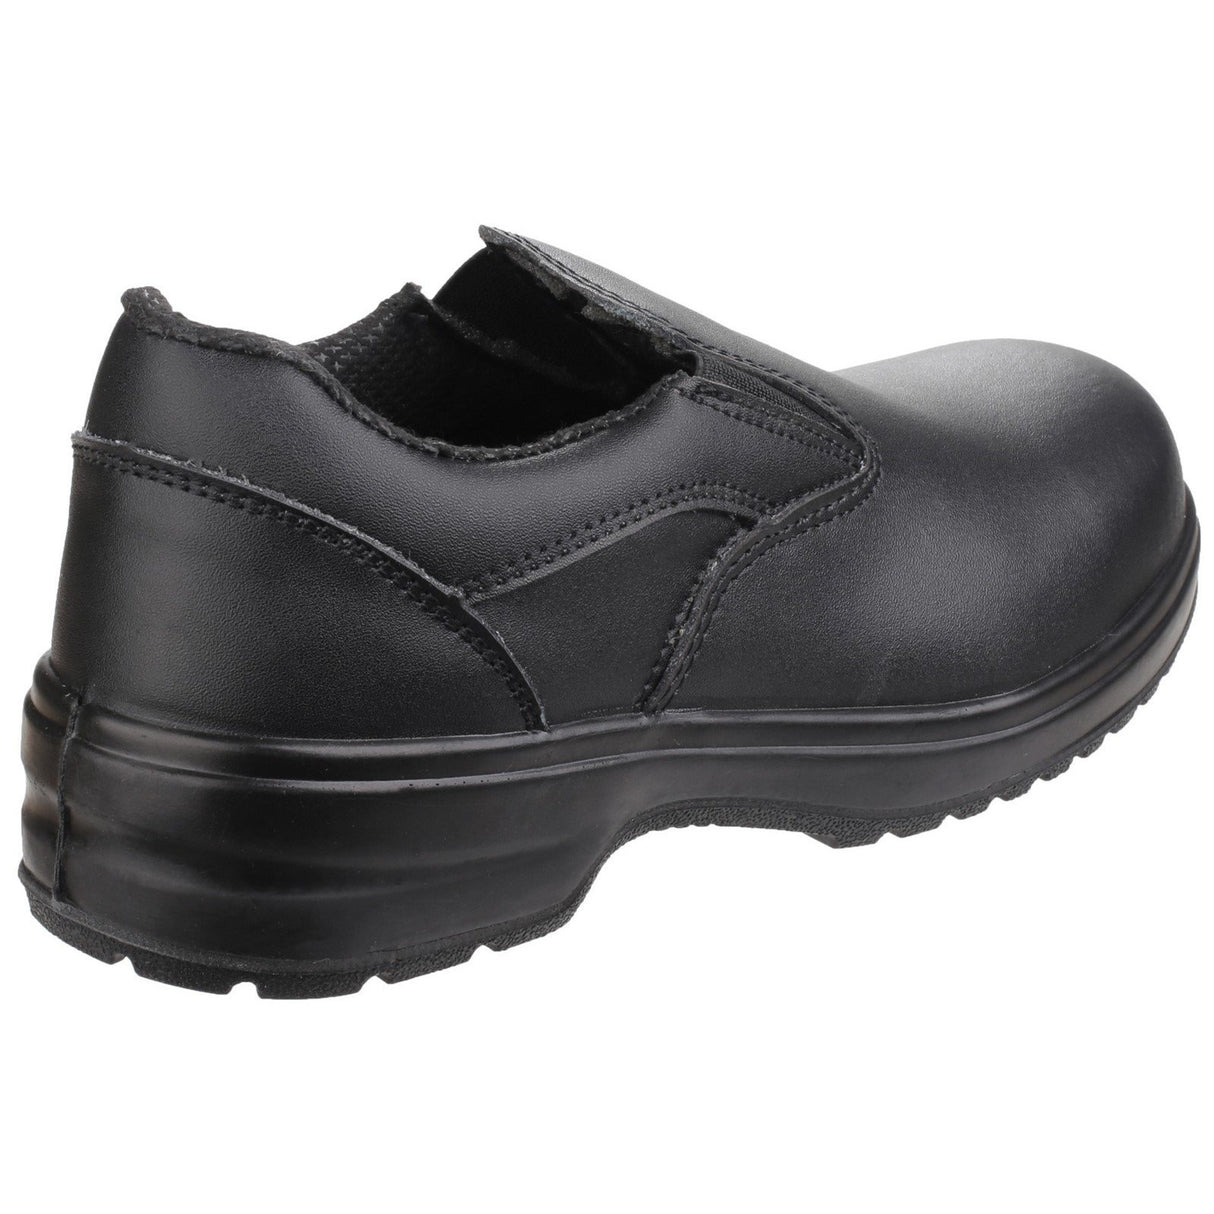 Amblers Safety Ladies Slip On Safety Shoes